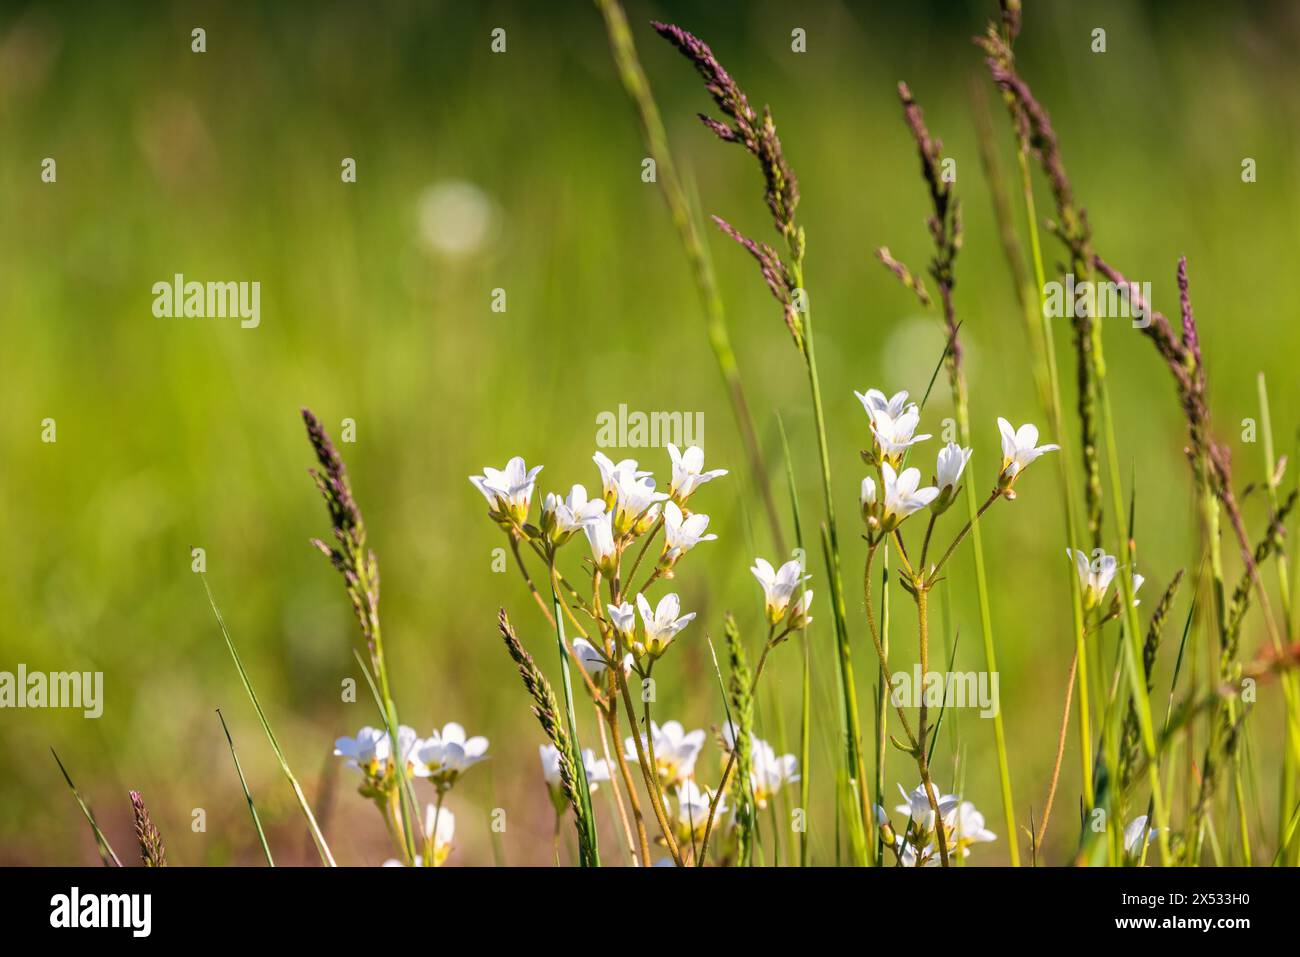 Flowering Meadow saxifrage (Saxifraga granulata) on a meadow and blade of grass Stock Photo